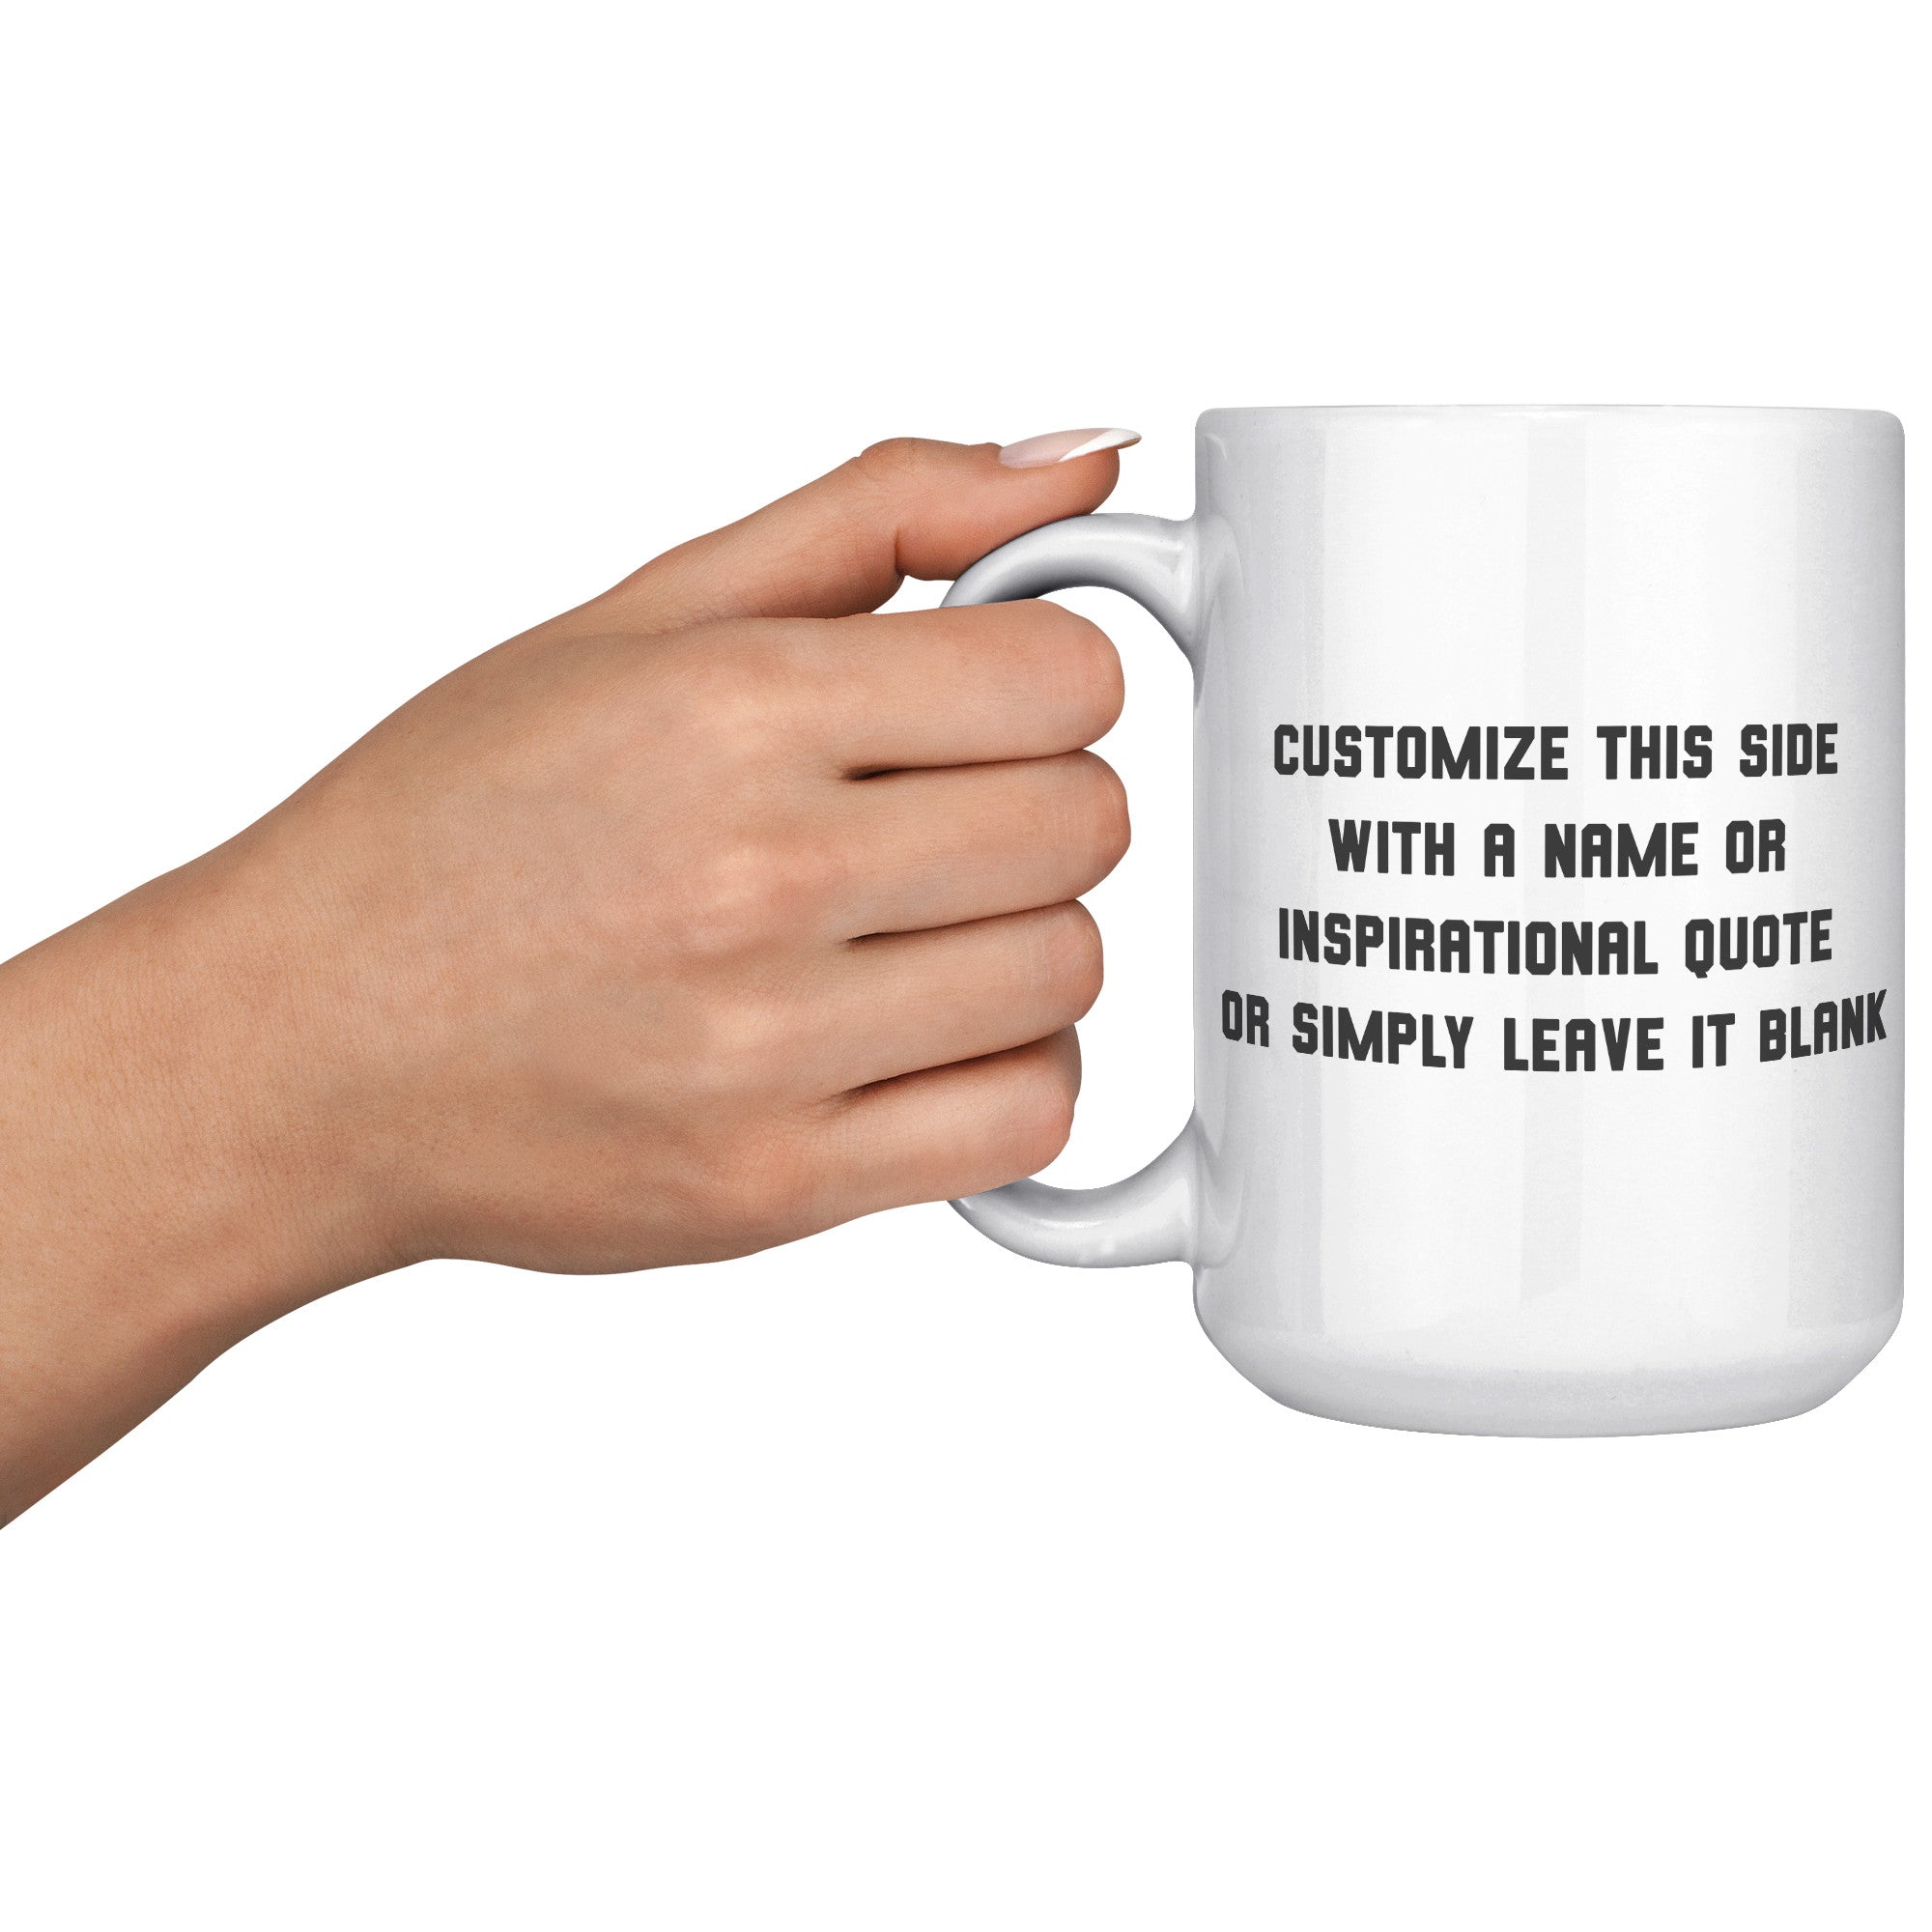 Male Runner Inspirational Mug - Motivational Running Quotes Cup - Perfect Gift for Marathon Men - Runner's Daily Dose of Determination - F1